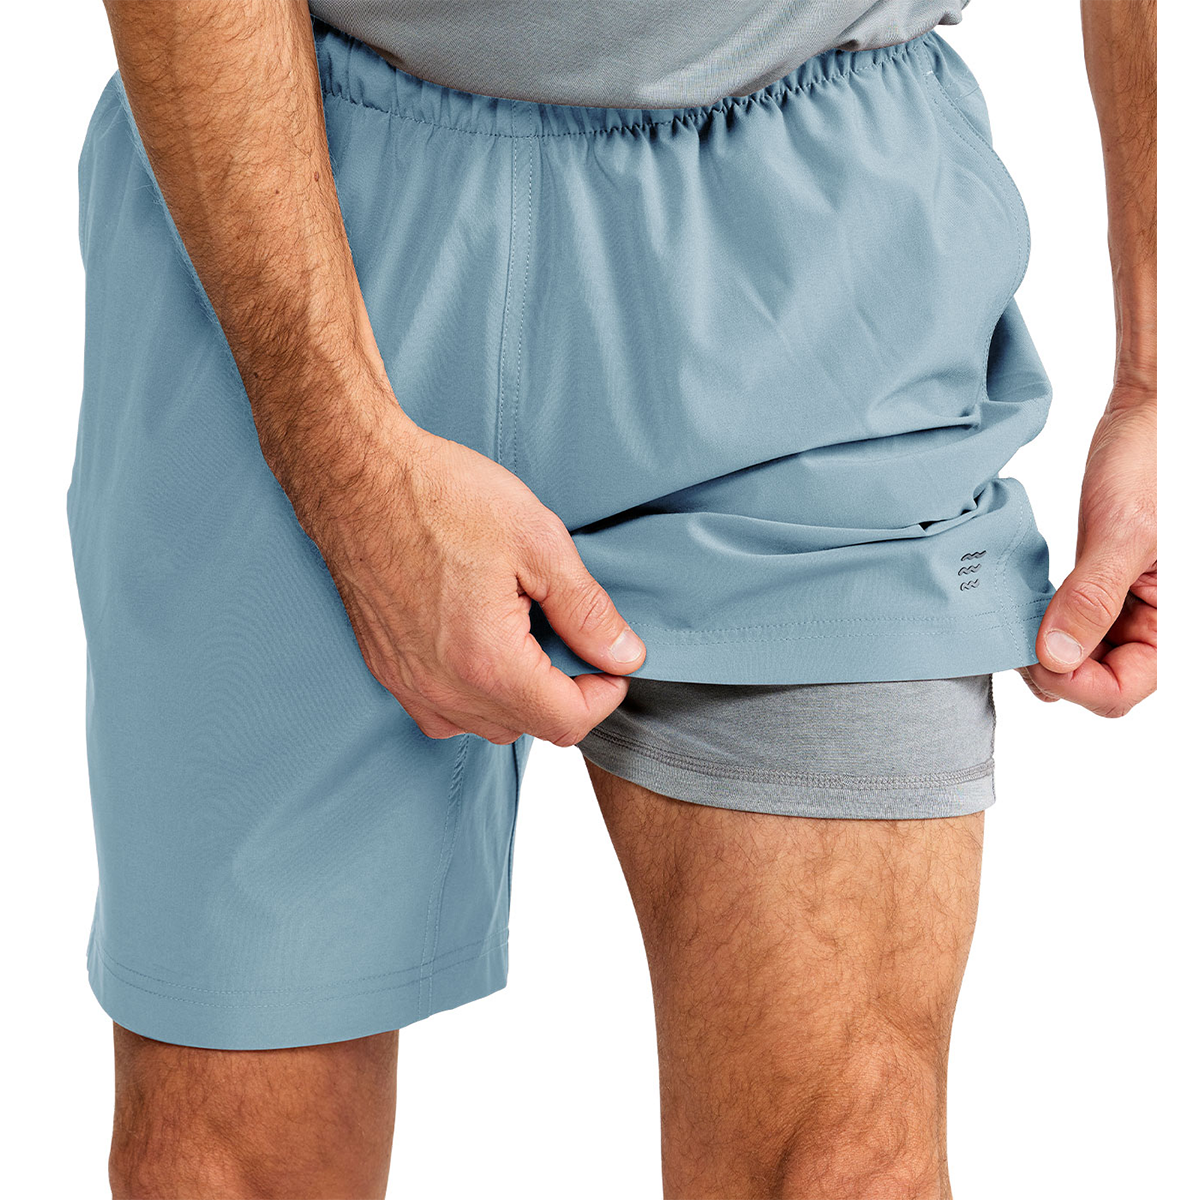 Free Fly Lined Breeze Short, , large image number null